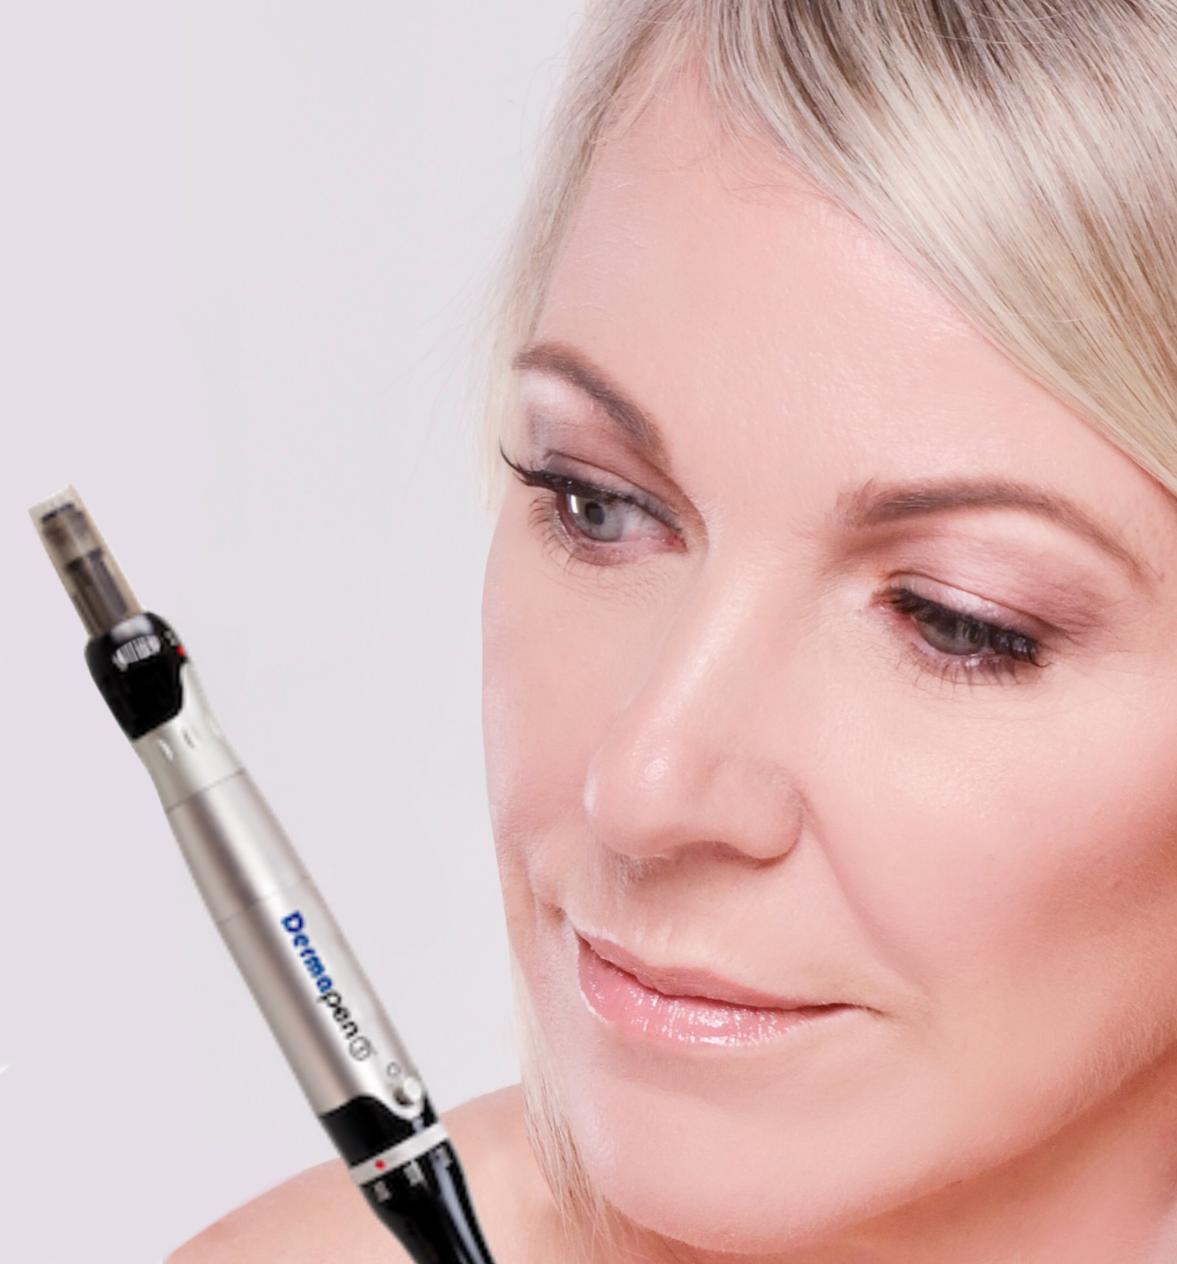 How Can I Find a Qualified Microneedling Collagen Induction Therapy Provider?